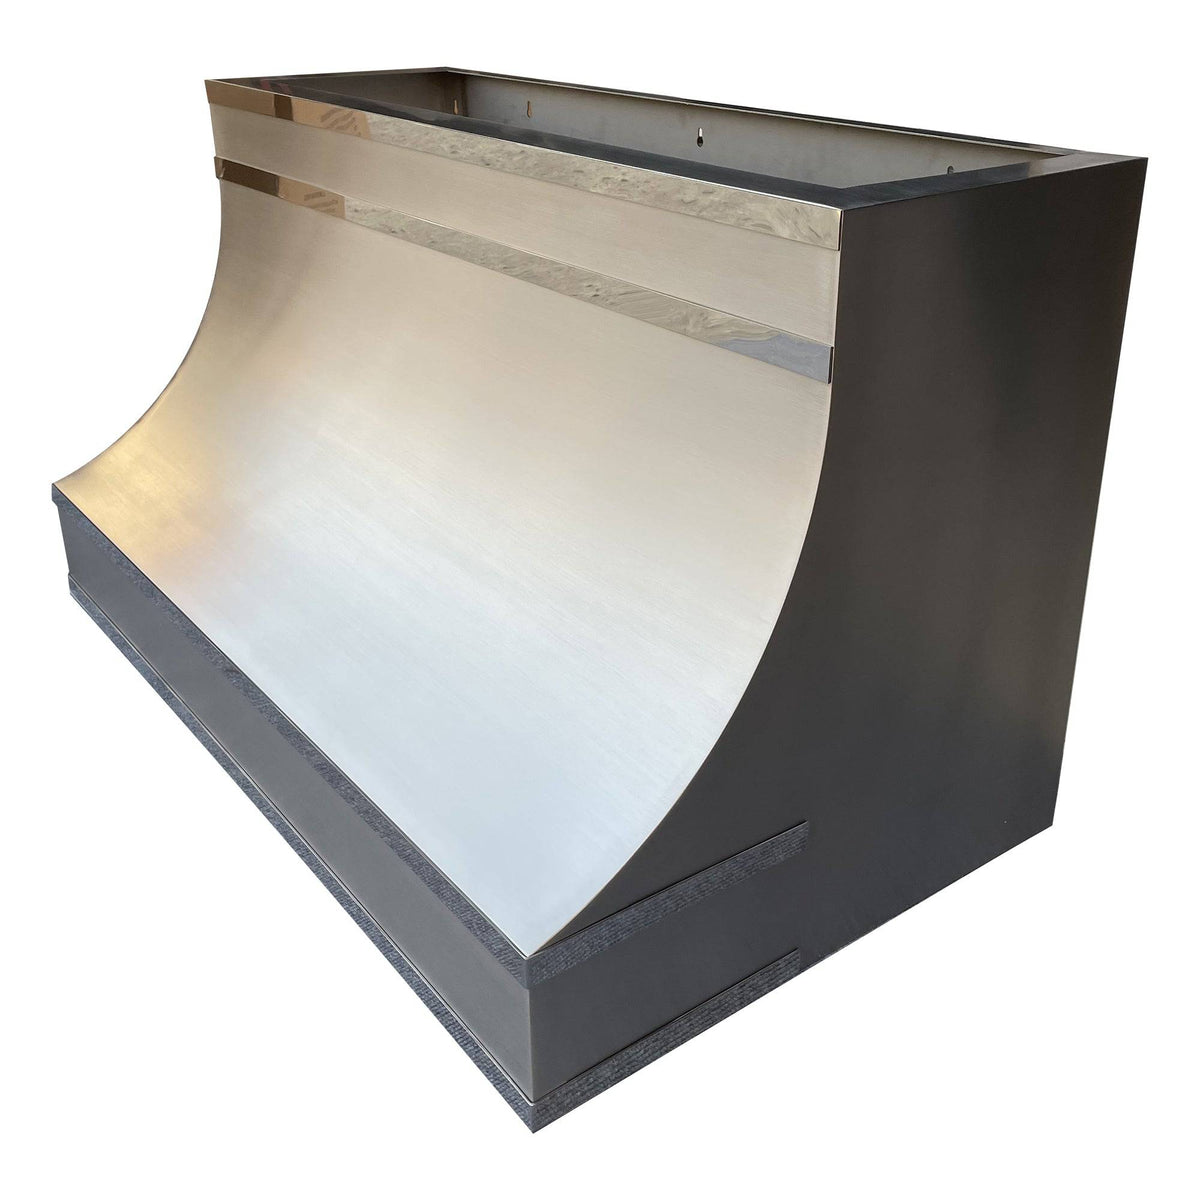 Fobest Custom Handcrafted Brushed Stainless Steel Range Hood FSS-58 - Stainless Steel Range Hood-Fobest Appliance